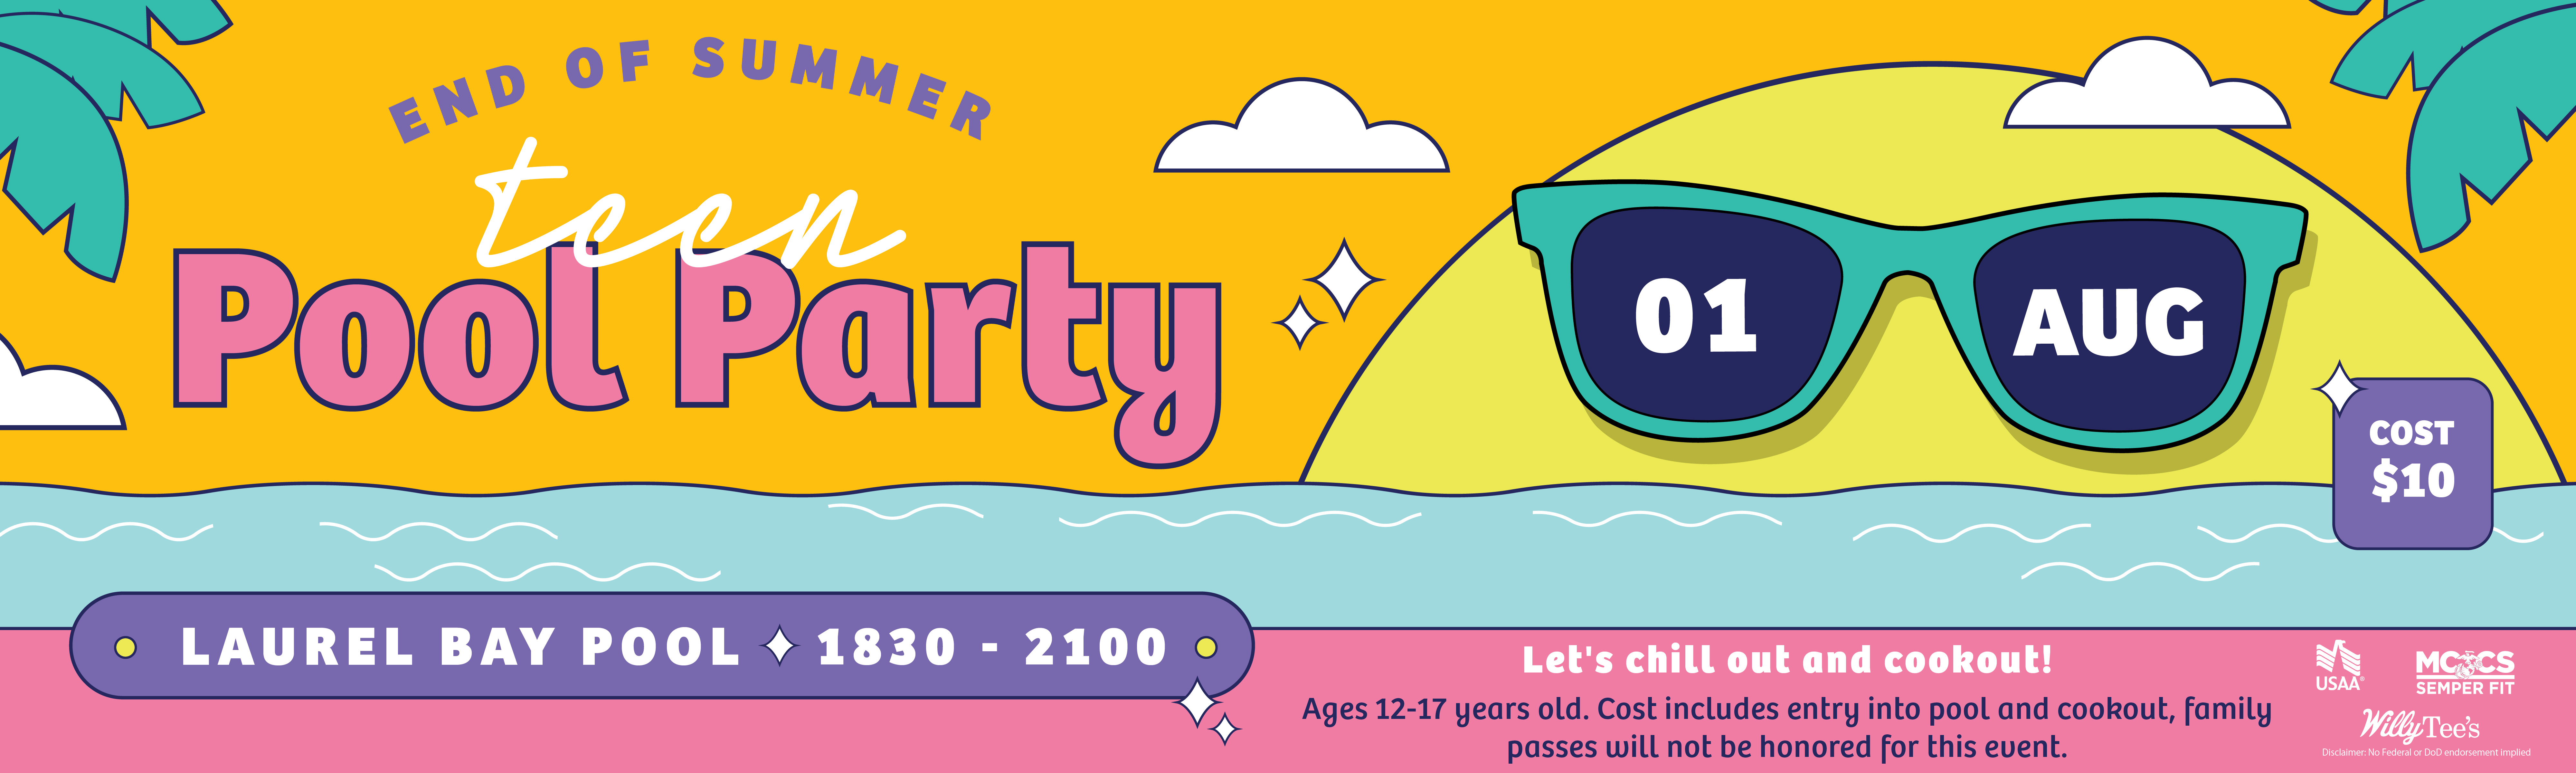 08-01 End of Summer Teen Pool Party_GRAPHIC.jpg